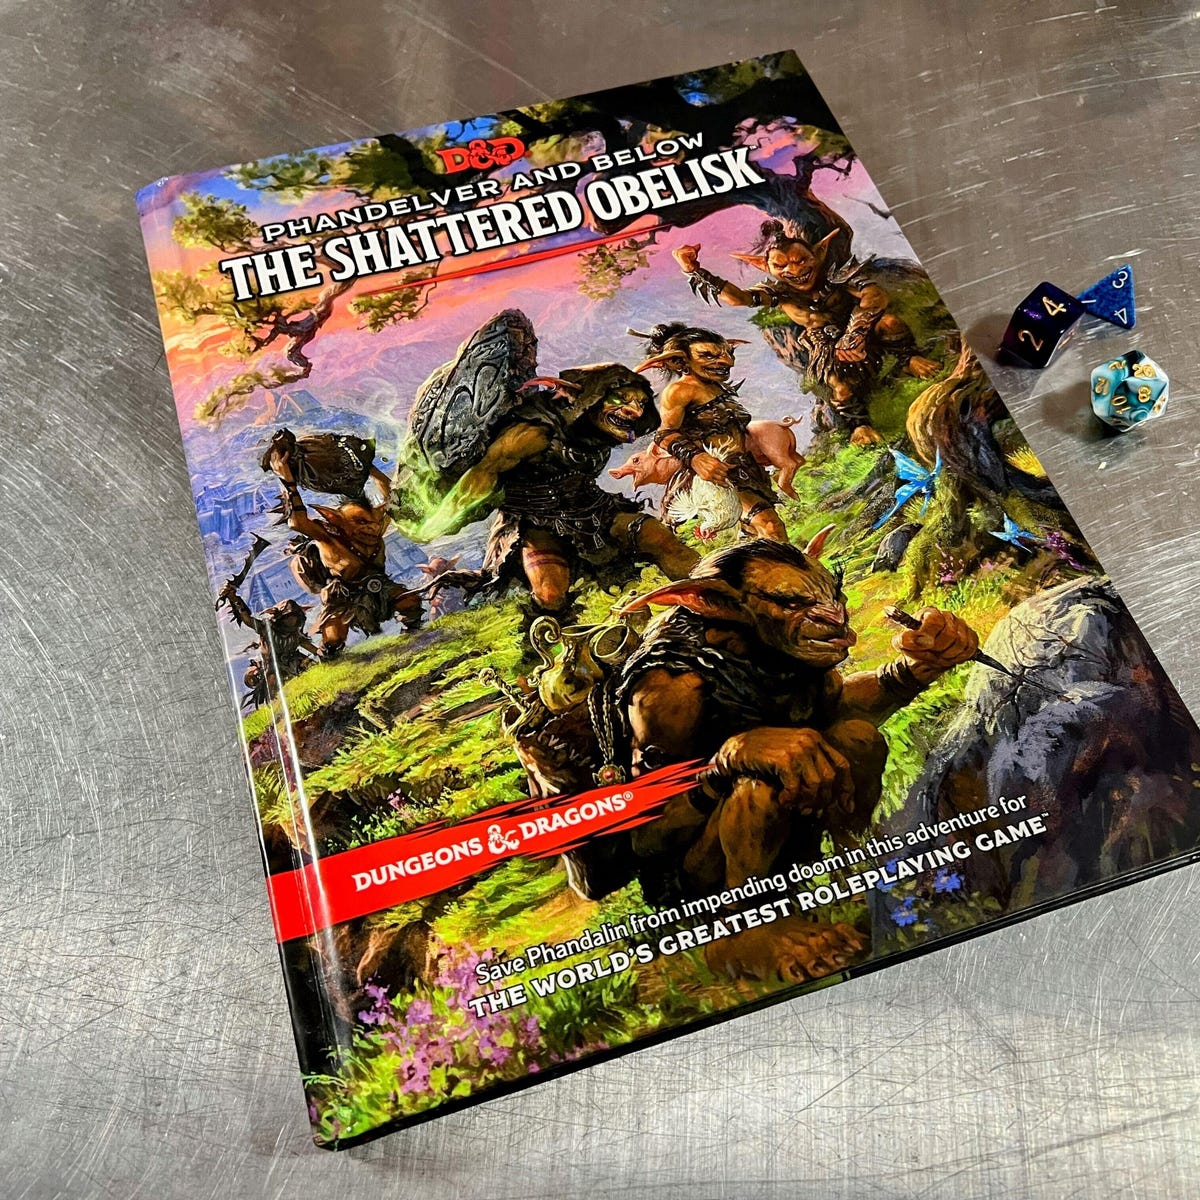 Lost In The Cloud Ch 64 Phandelver and Below: The Shattered Obelisk Is a Must for Any D&D Fan - CNET